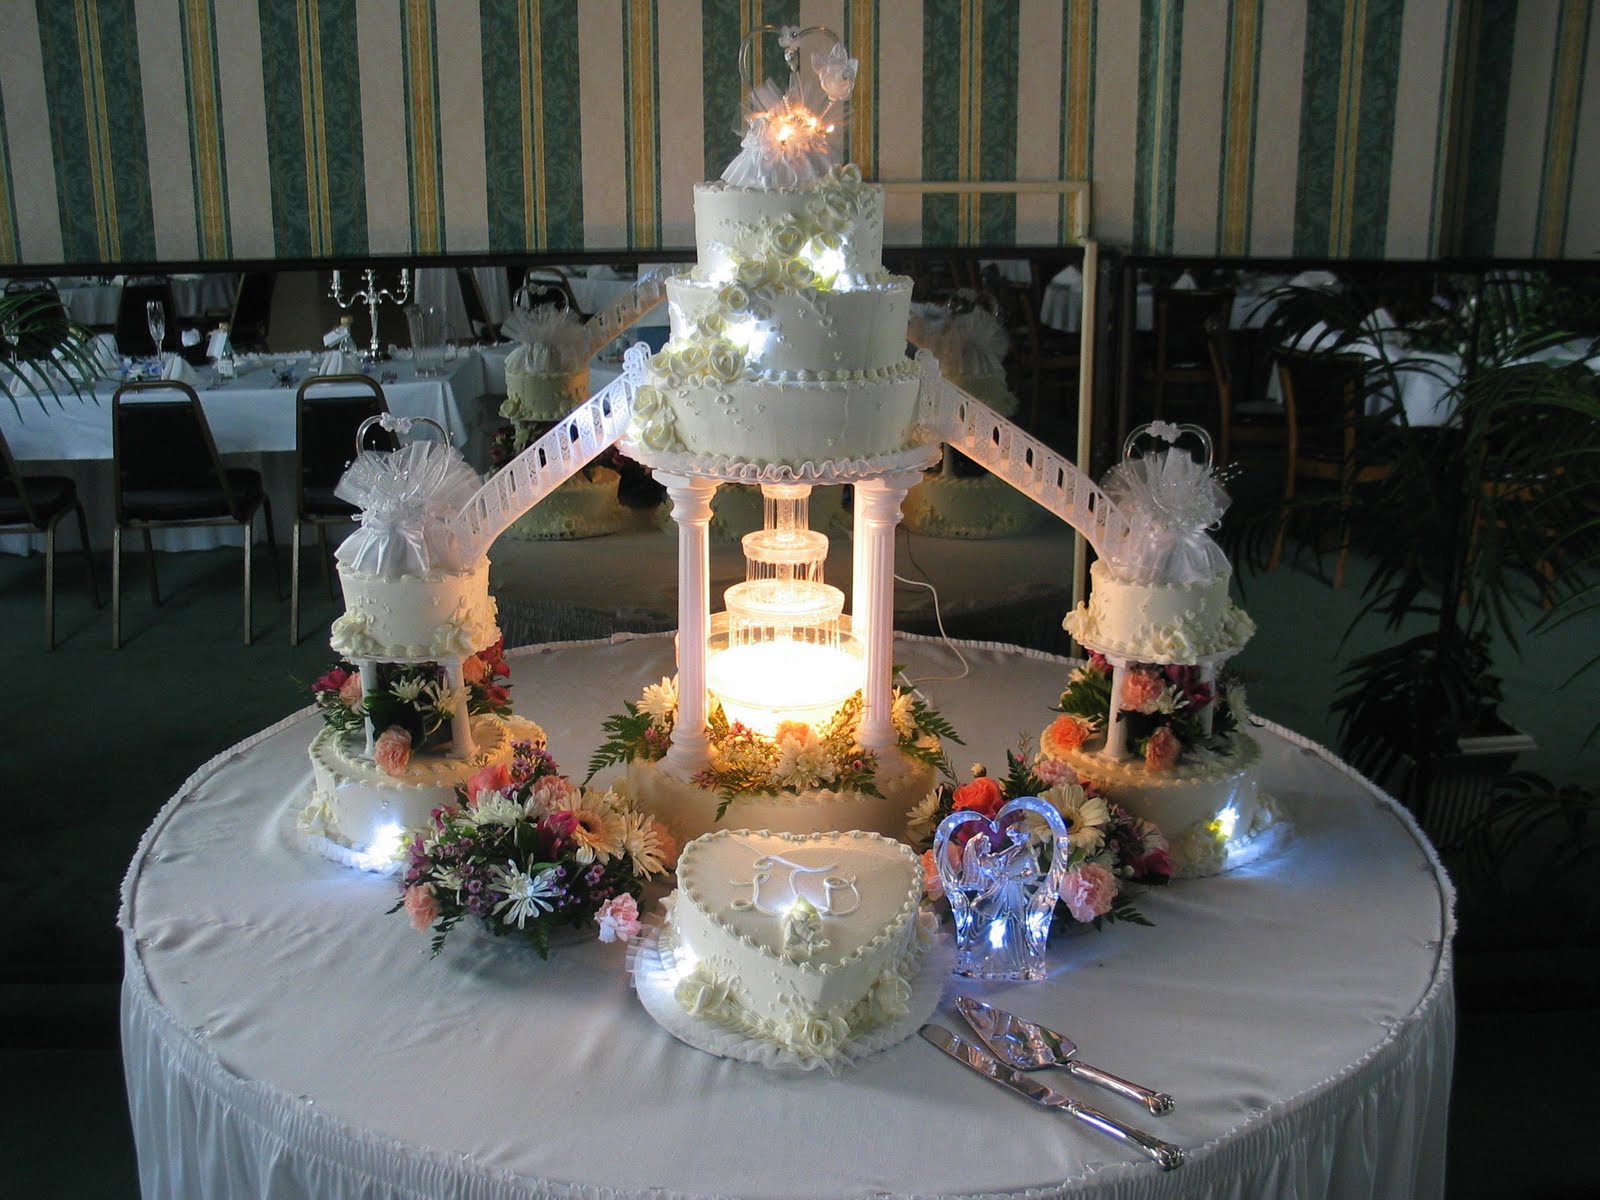  Wedding  Cakes  With Fountain  And Stairs